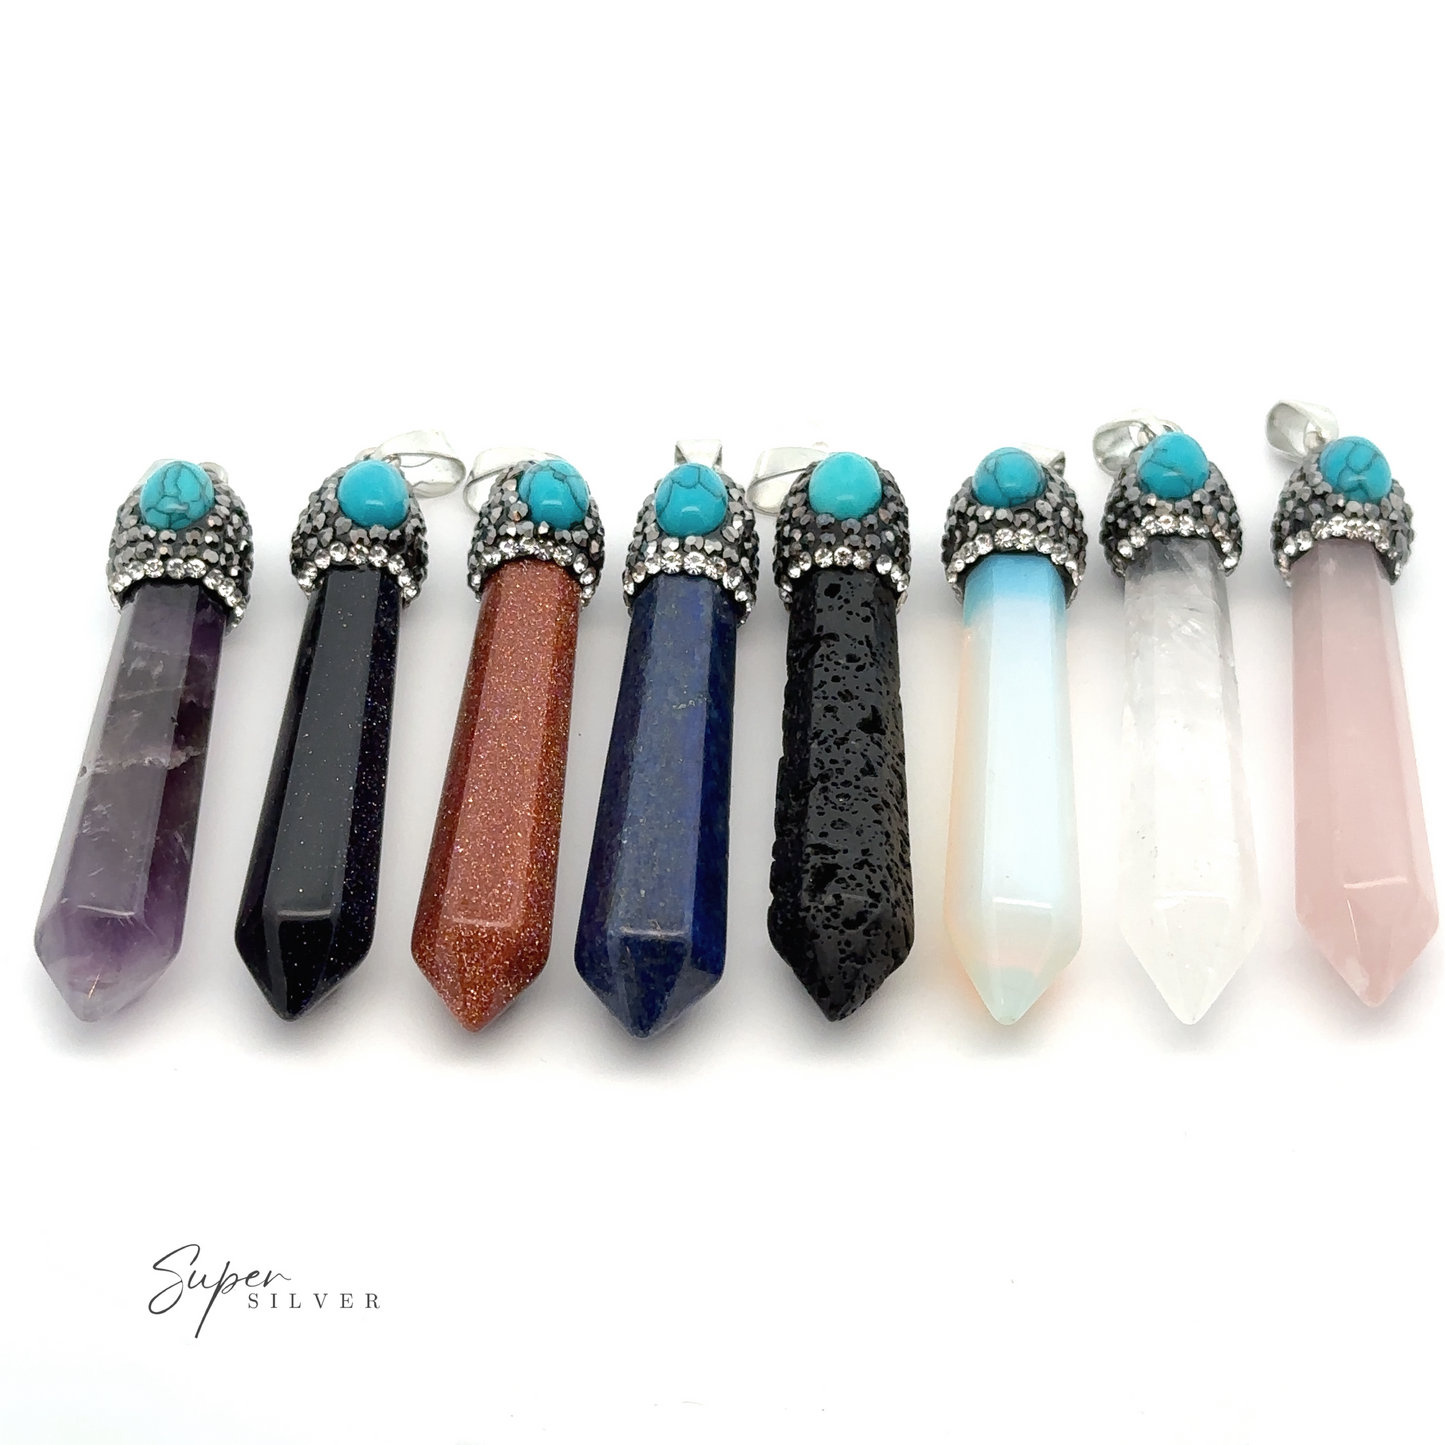 A row of eight Stone Obelisk Pendants are displayed, each adorned with a silver cap and turquoise stone on the top. Colors from left to right include purple, black, red-brown, dark blue, black, light blue, clear, and pink.